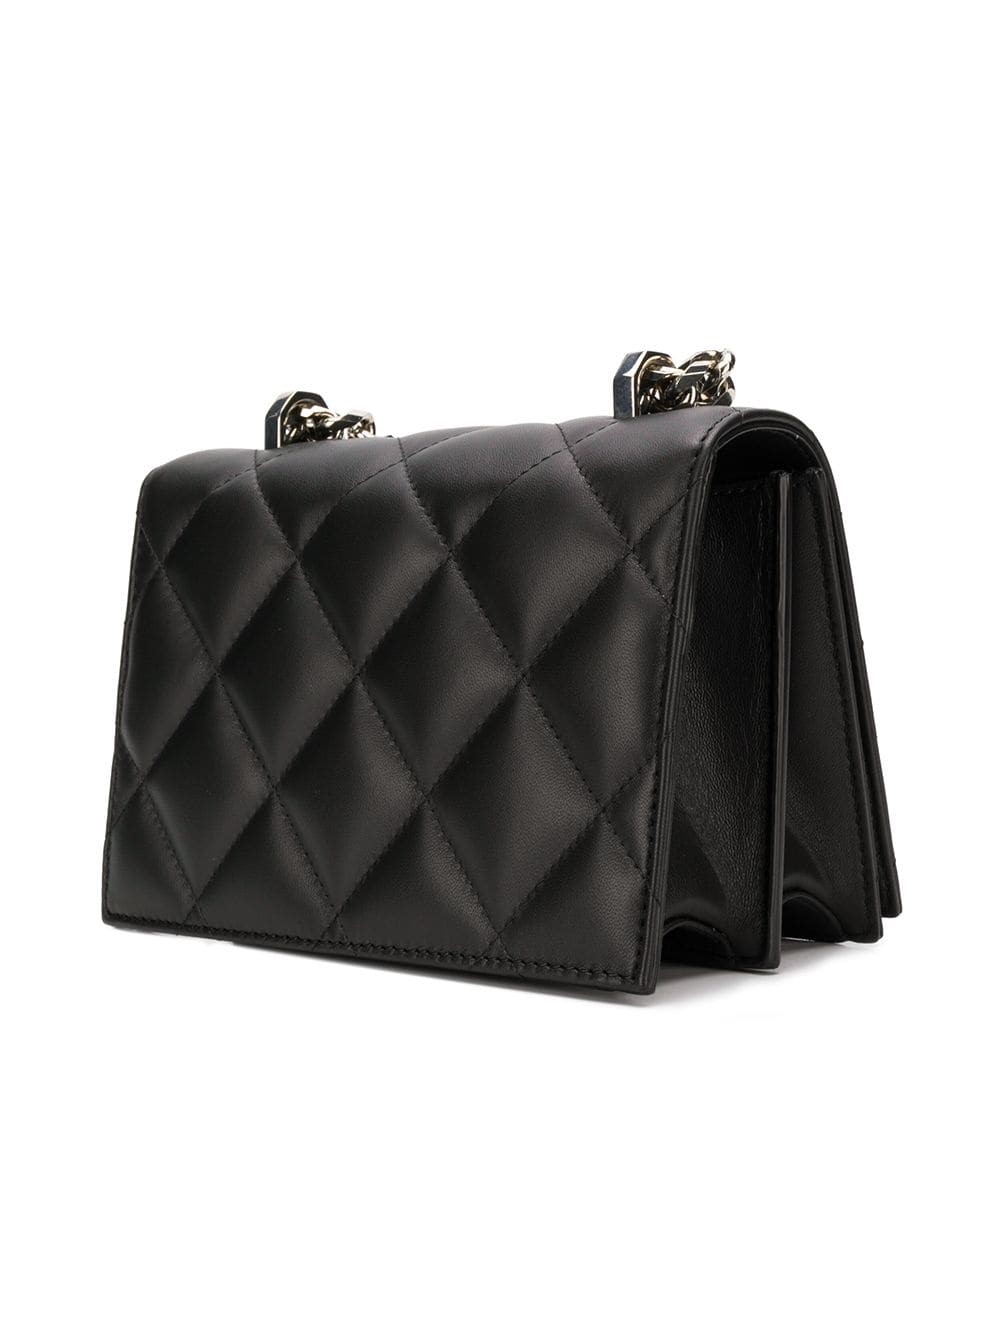 alexander mcqueen 4 RINGS QUILTED SHOULDER BAG available on